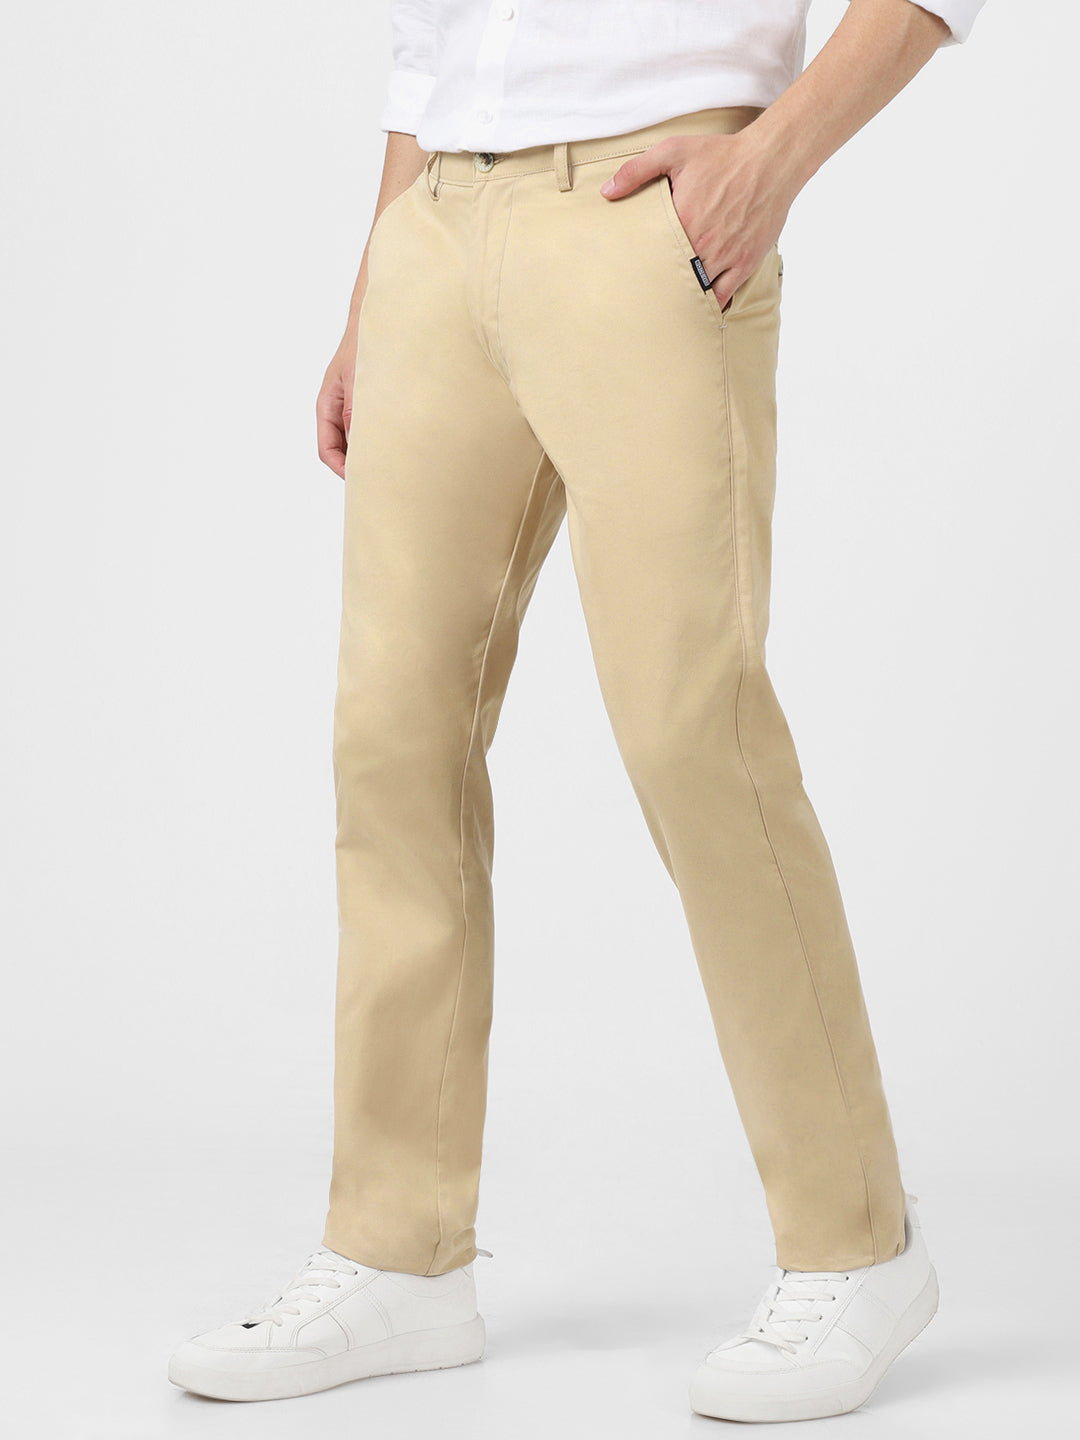 Men's Beige Cotton Slim Fit Casual Chinos Trousers Stretch